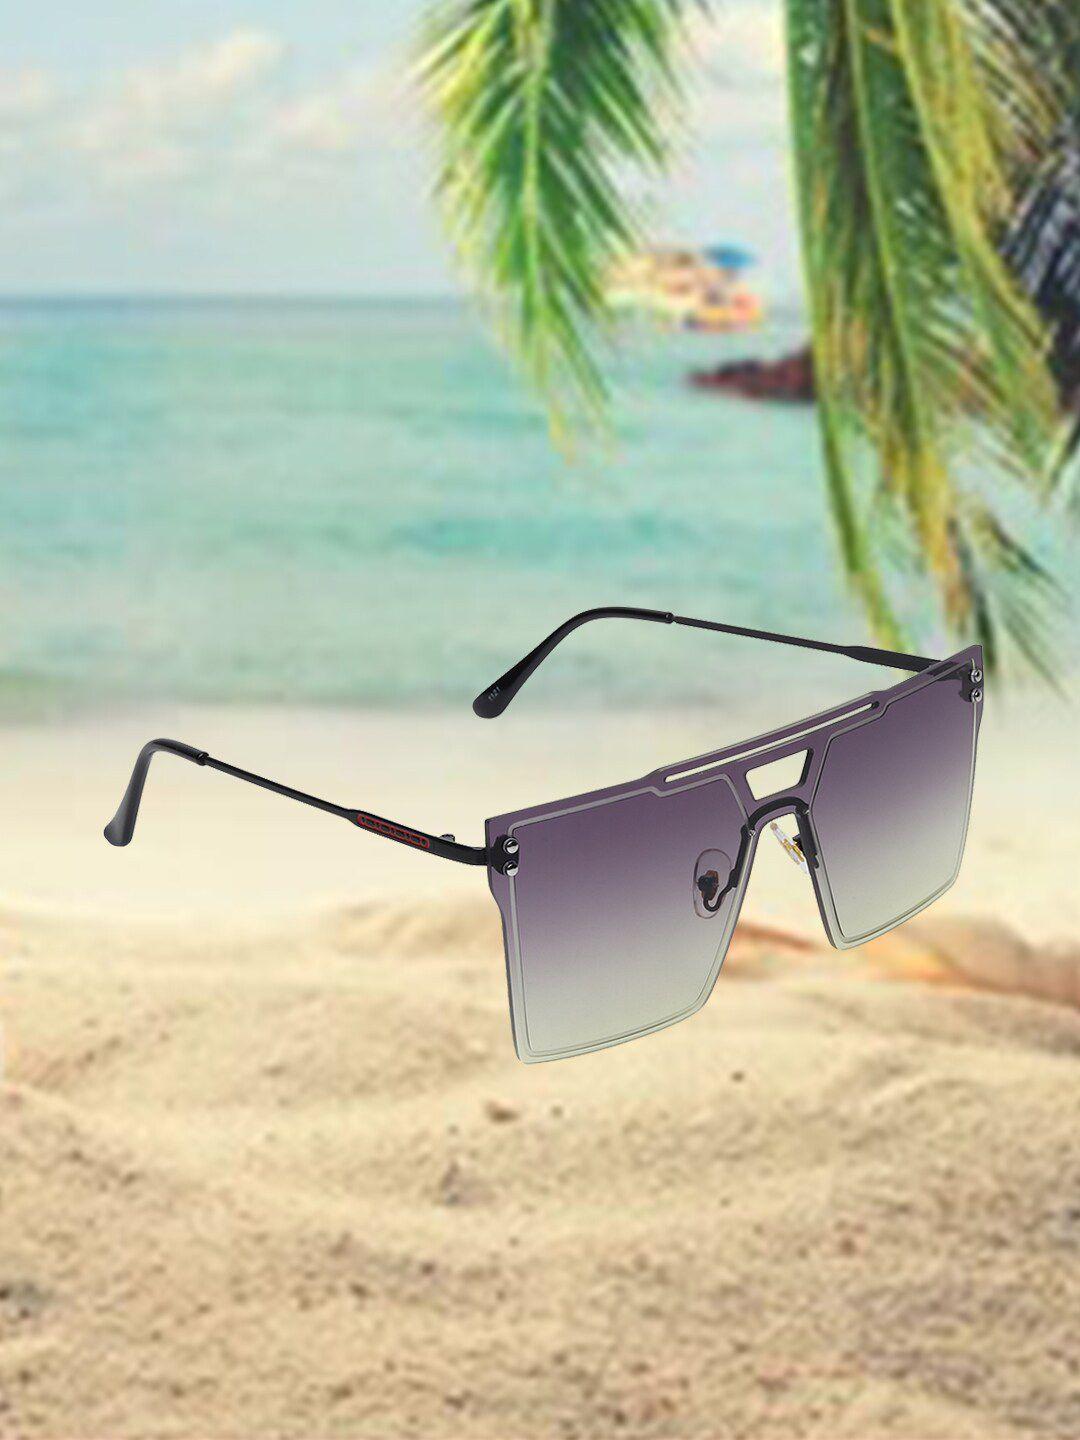 celebrity sunglasses oversized sunglasses with uv protected lens-clsg-1122-0